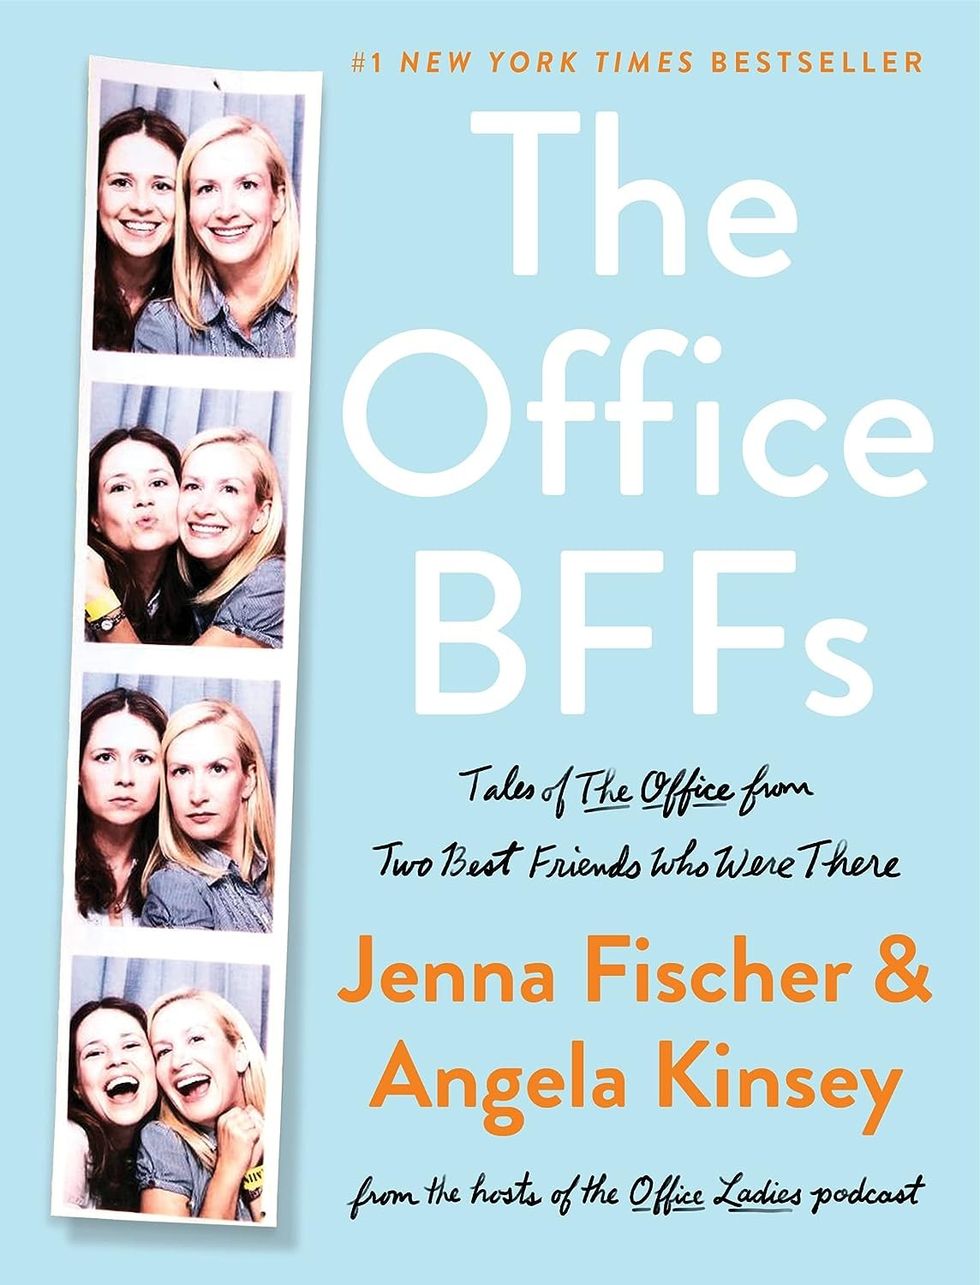 "The Office BFFs: Tales of The Office from Two Best Friends Who Were There" by Jenna Fischer and Angela Kinsey